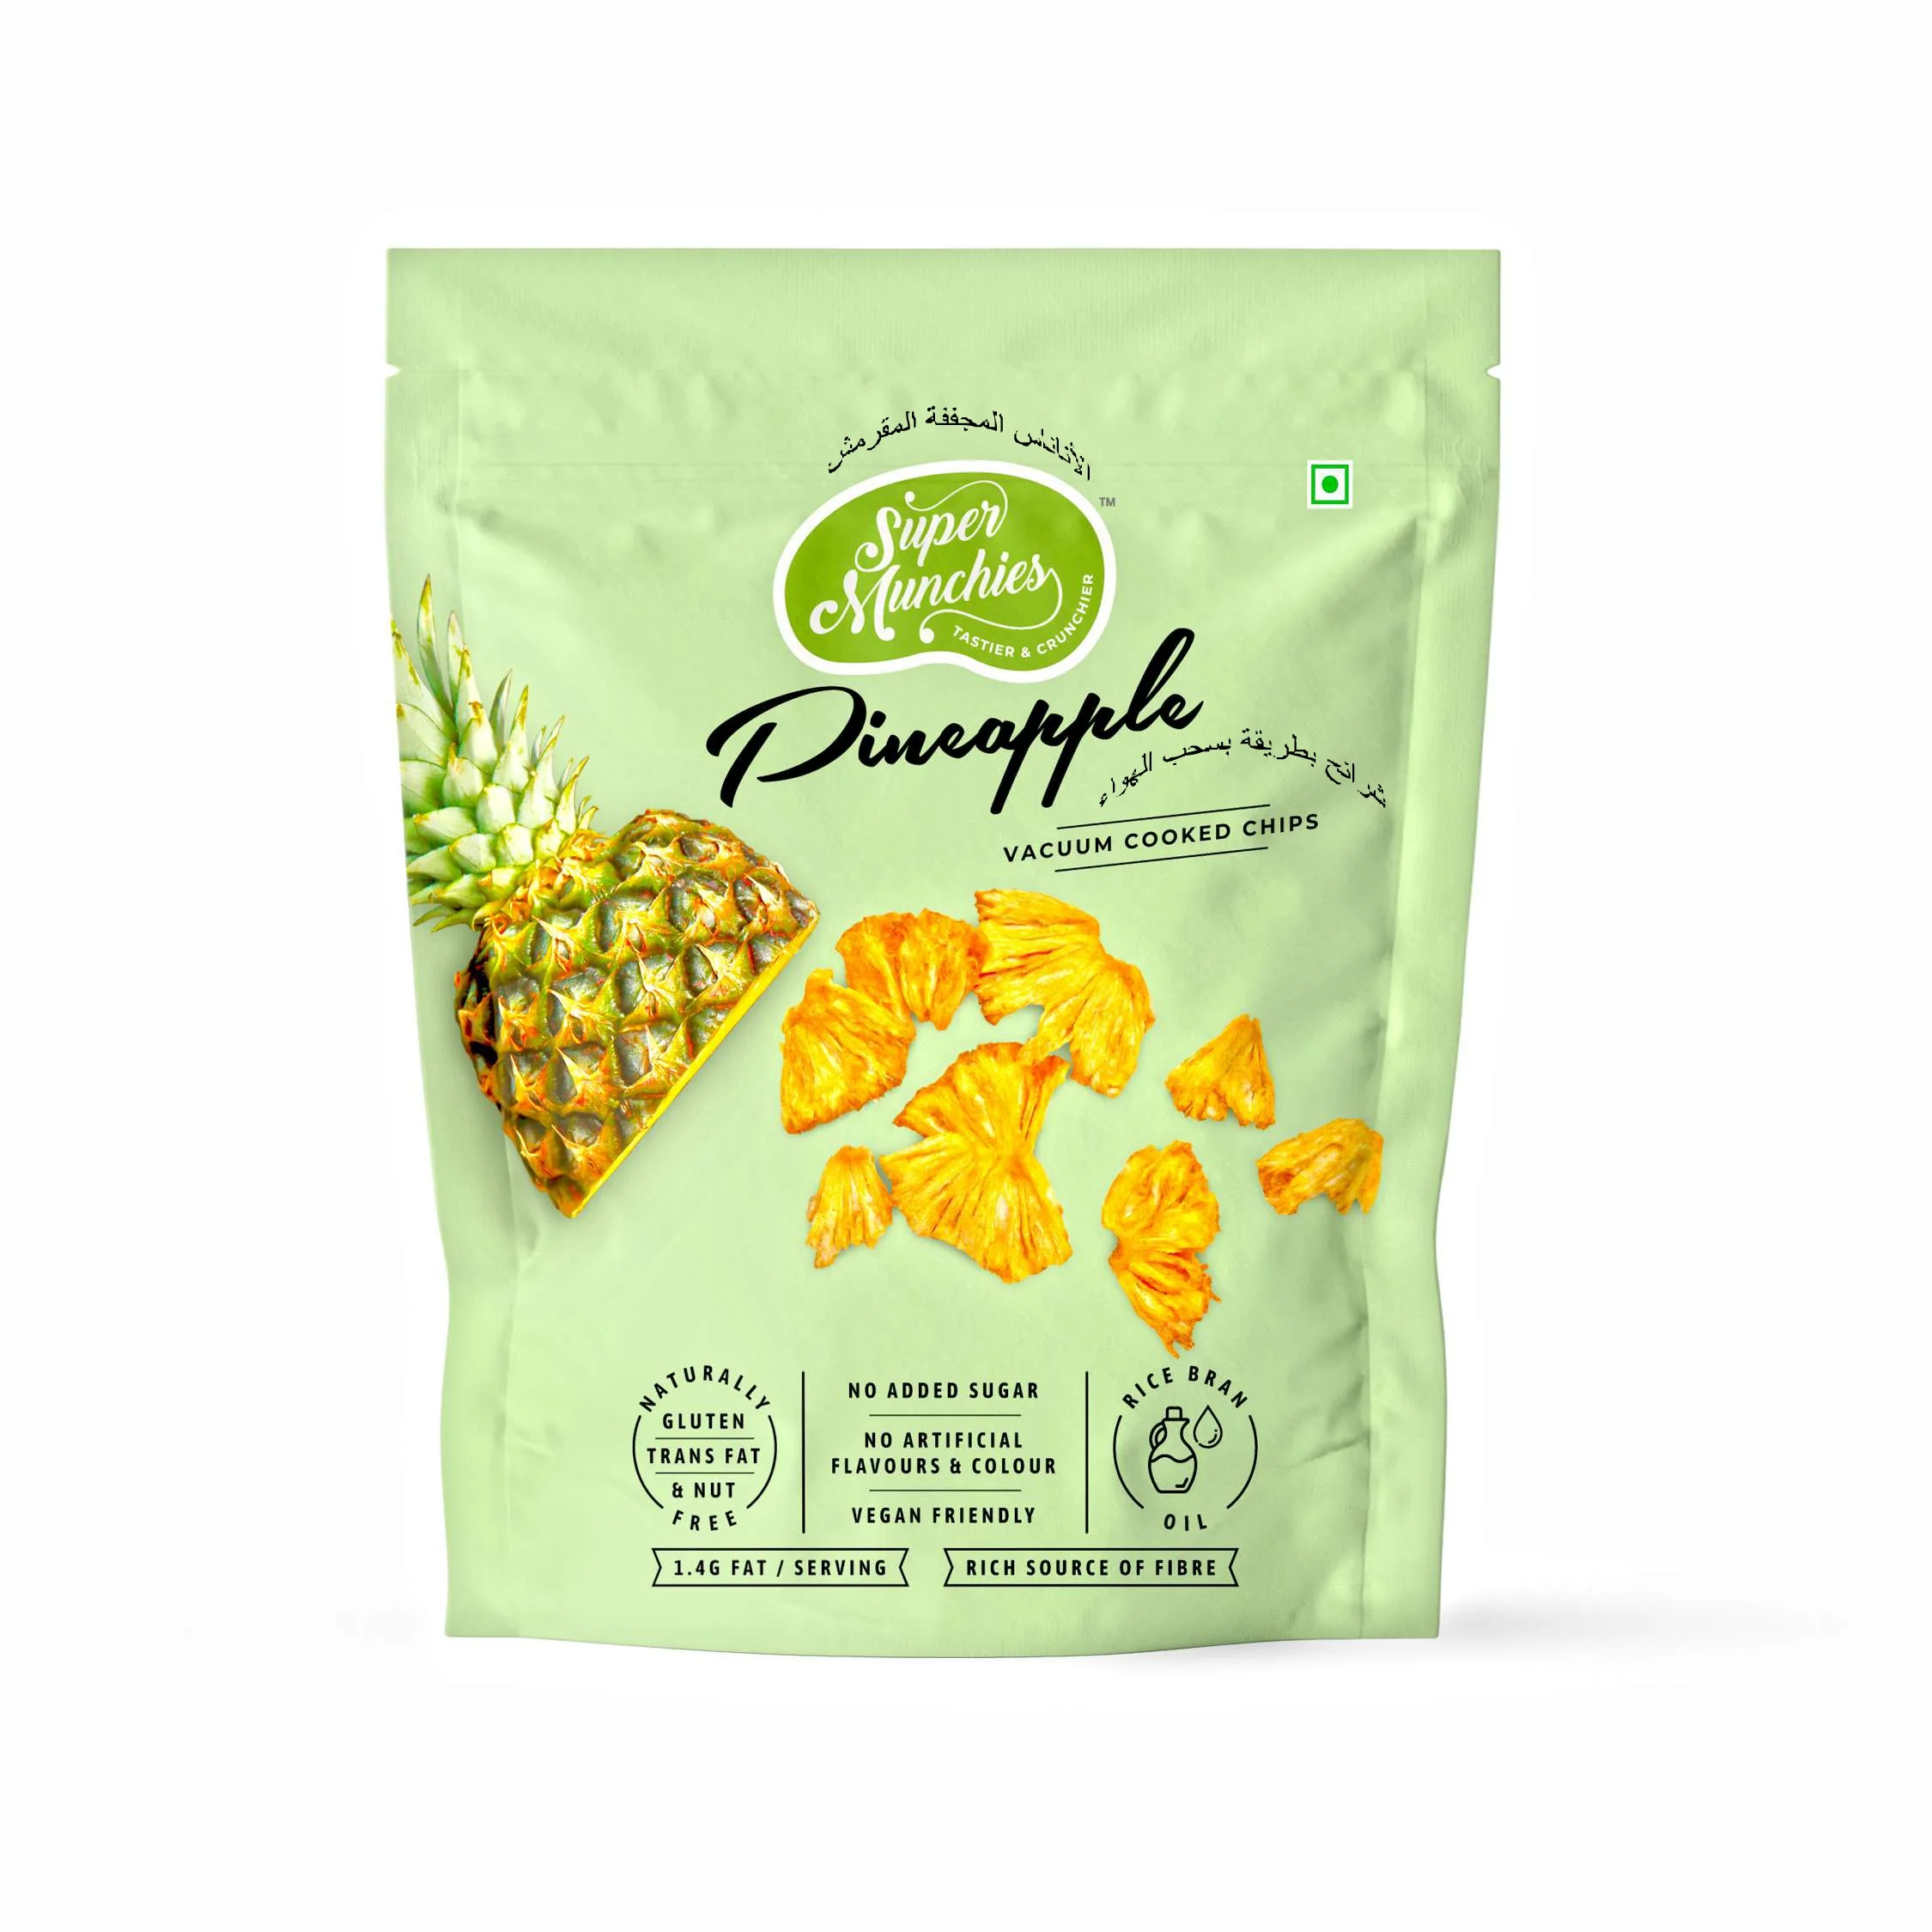 Super Munchies vacuum cooked Pineapple Chips